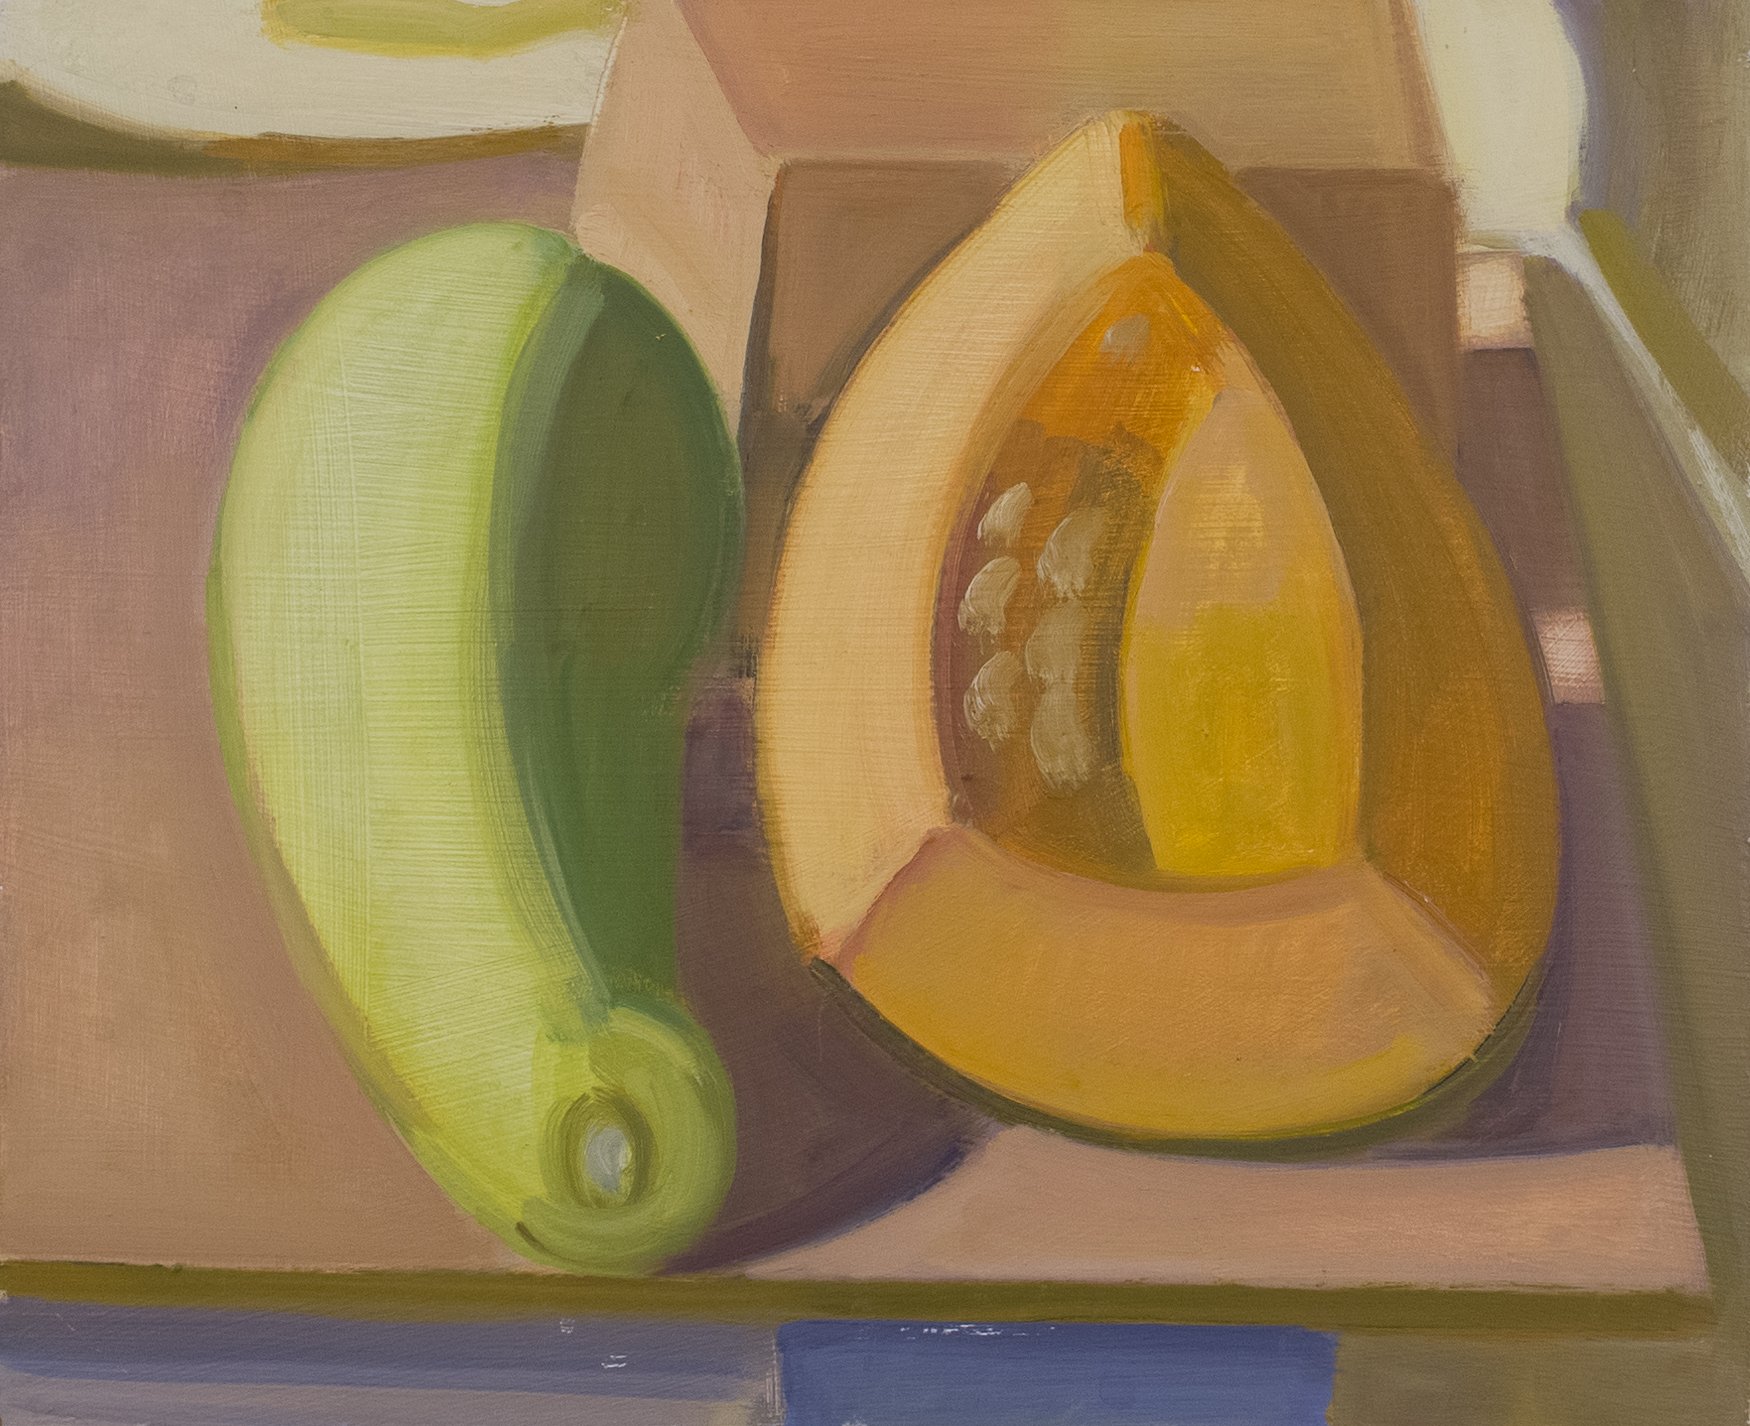   Bottle Gourd, Fruit Box , c. 2005, oil/panel, 10 x 12 in. (Private collection) 